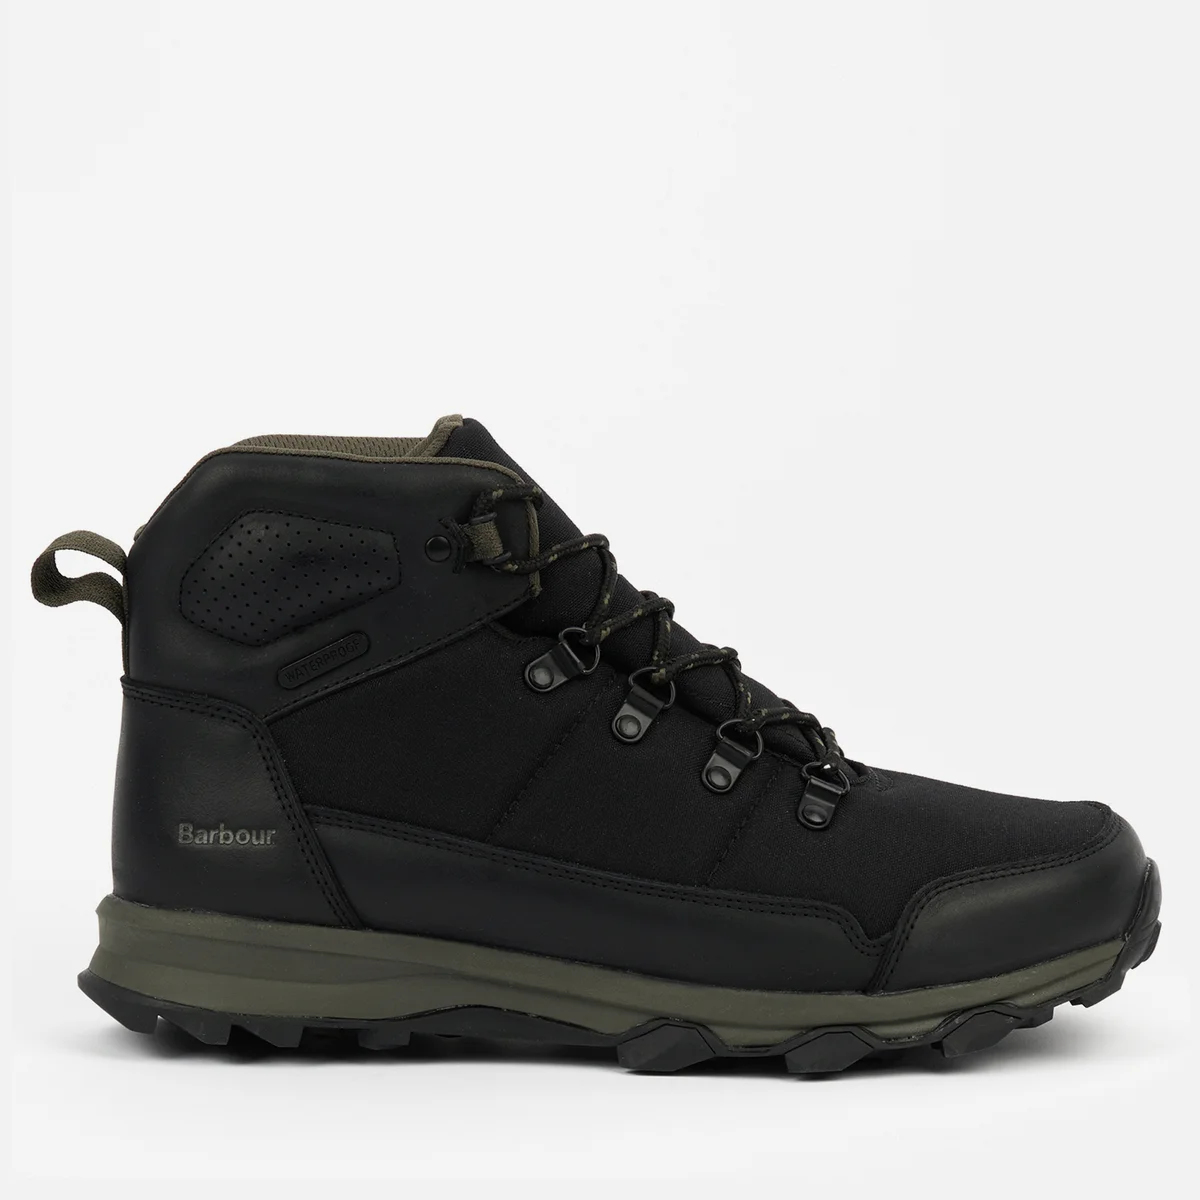 Barbour Men's Malvern Waterproof Leather and Nylon Boots Image 1